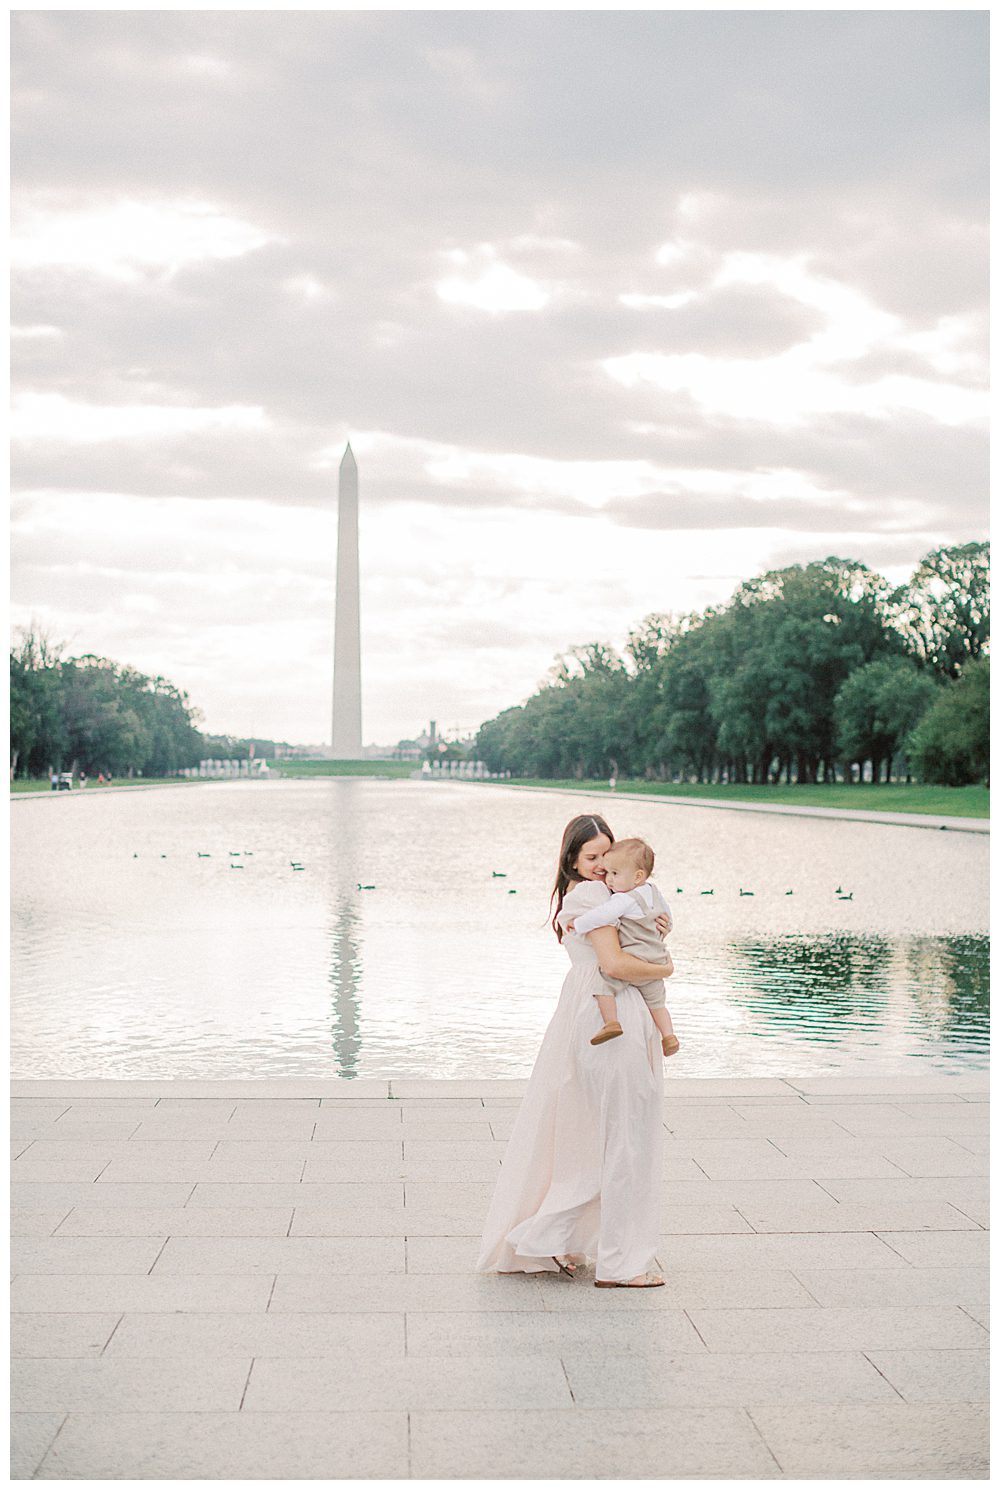 Mother walks in front of Washington monument while holding toddler son during DC Monuments Family Photo Session.